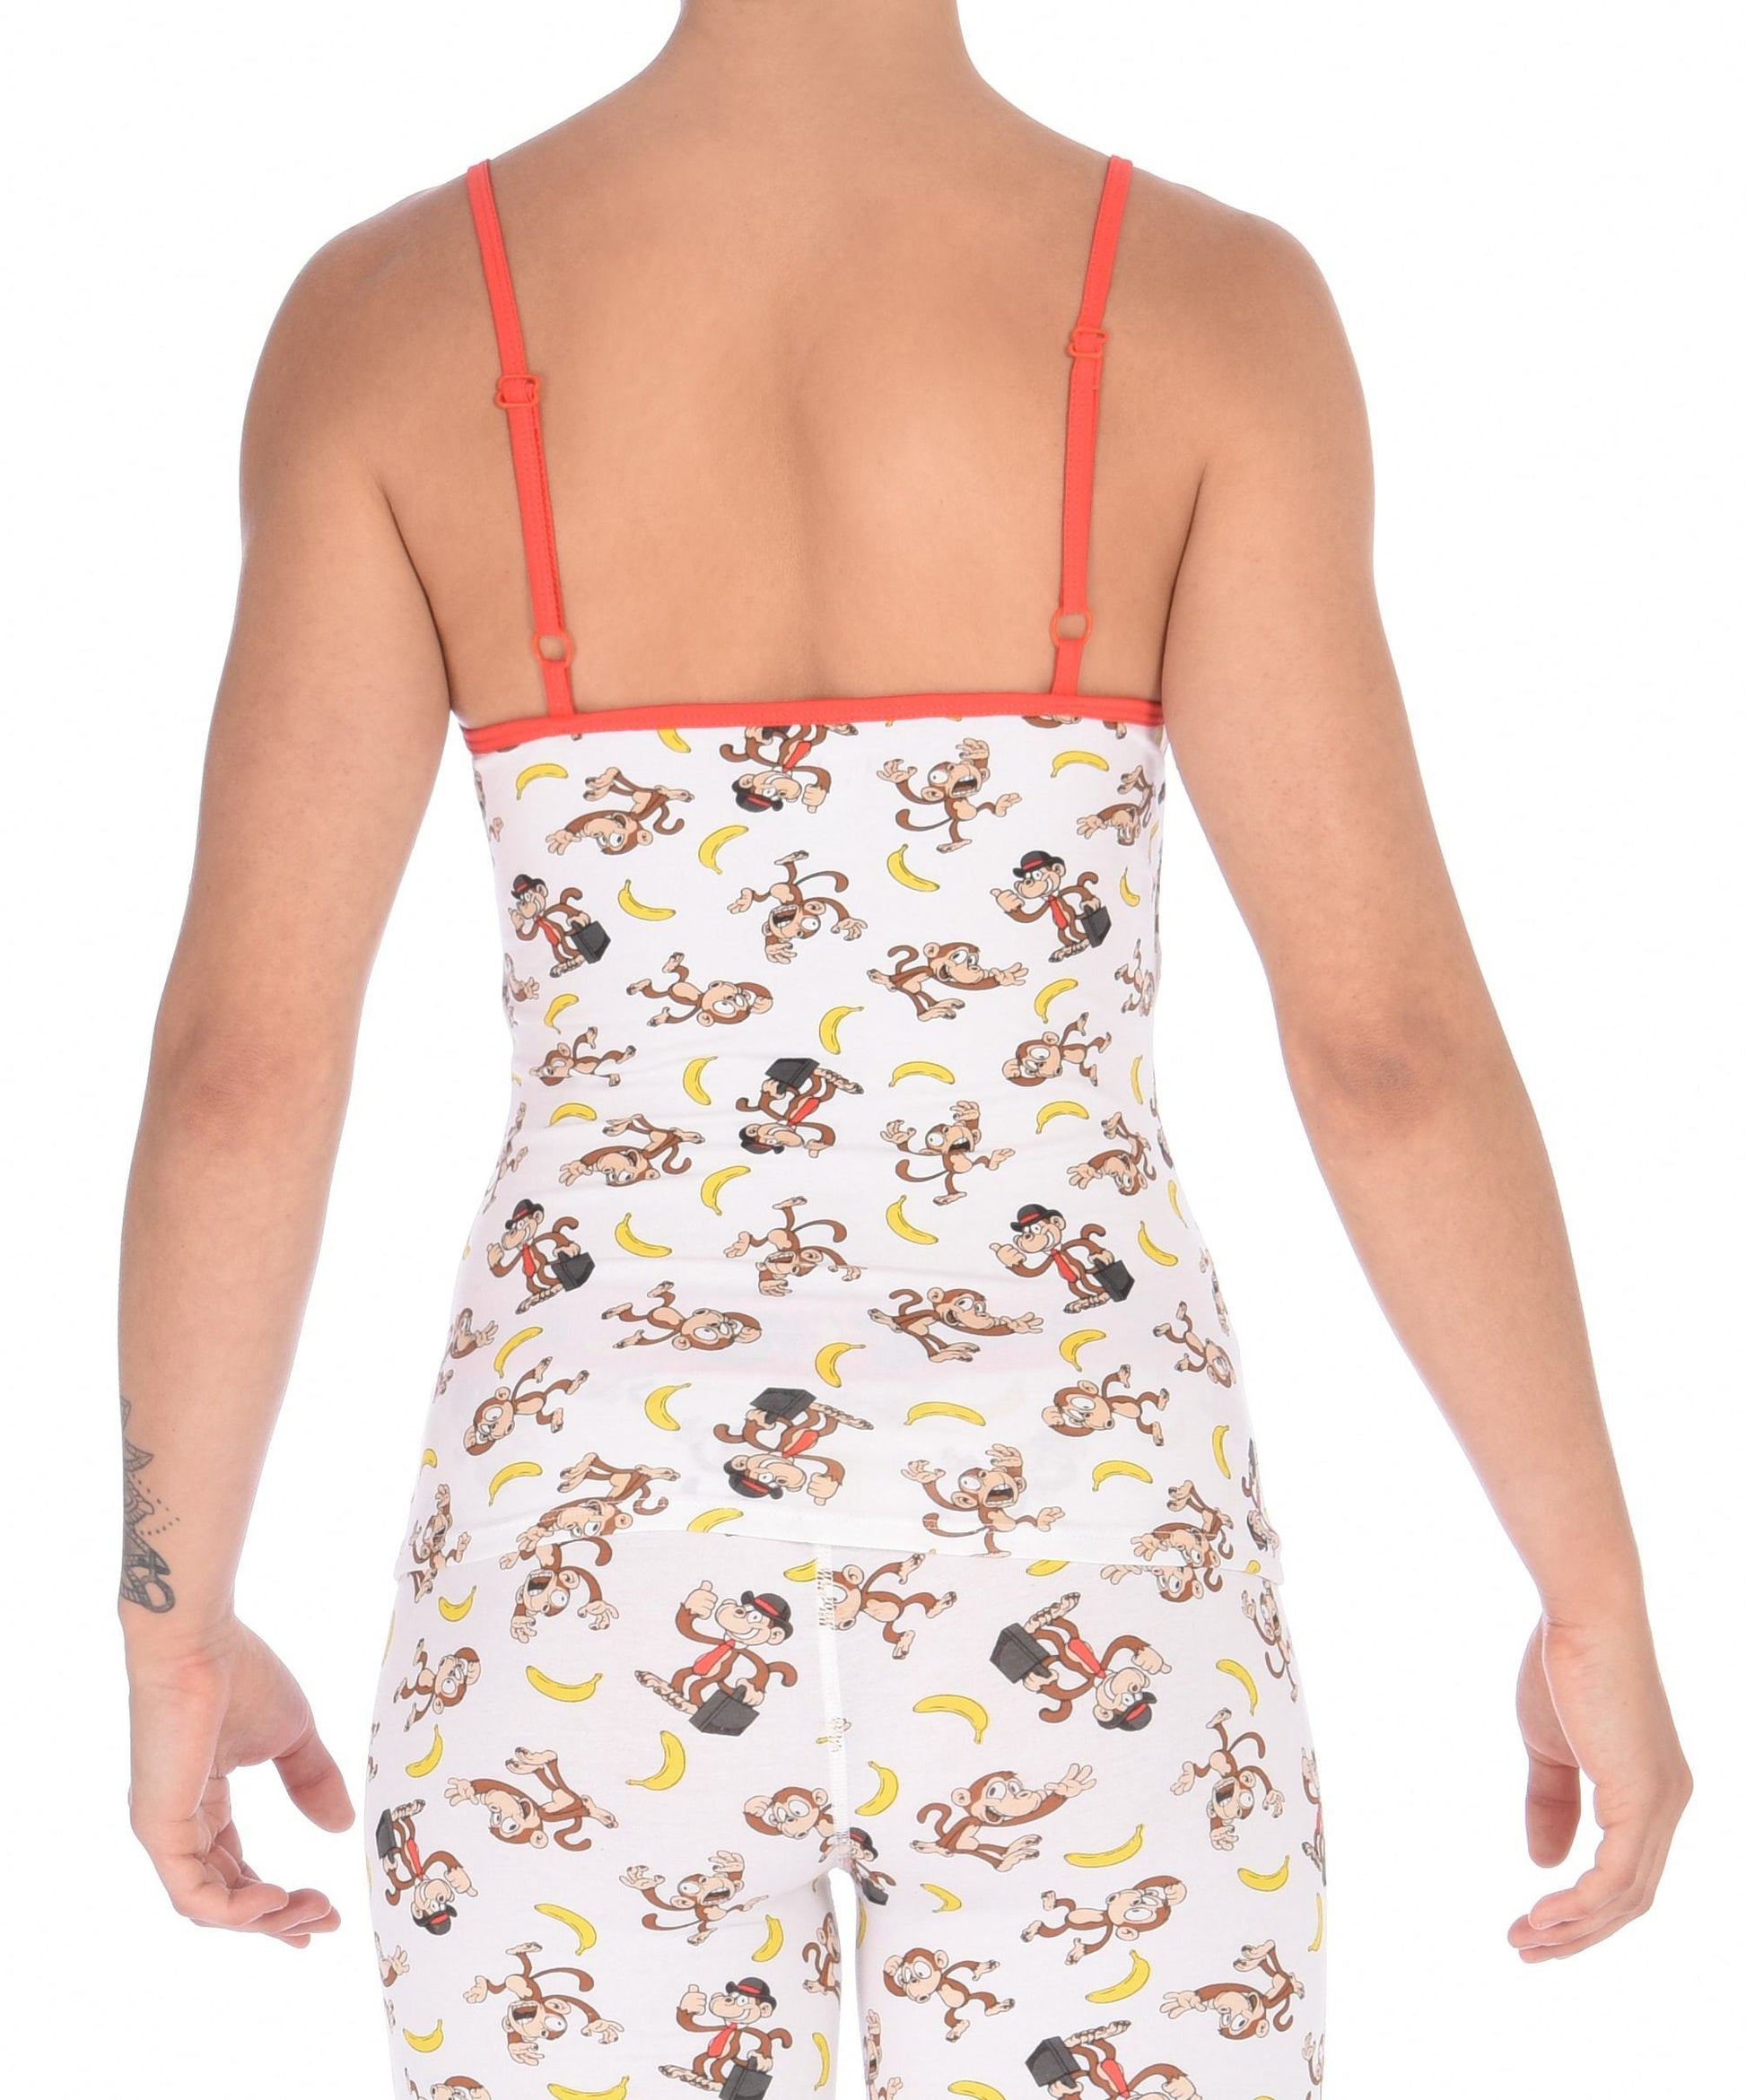 GG Ginch Gonch Gone Bananas cami camisole spaghetti strap women's long underwear white fabric with monkeys and bananas red trim back shown with matching leggings